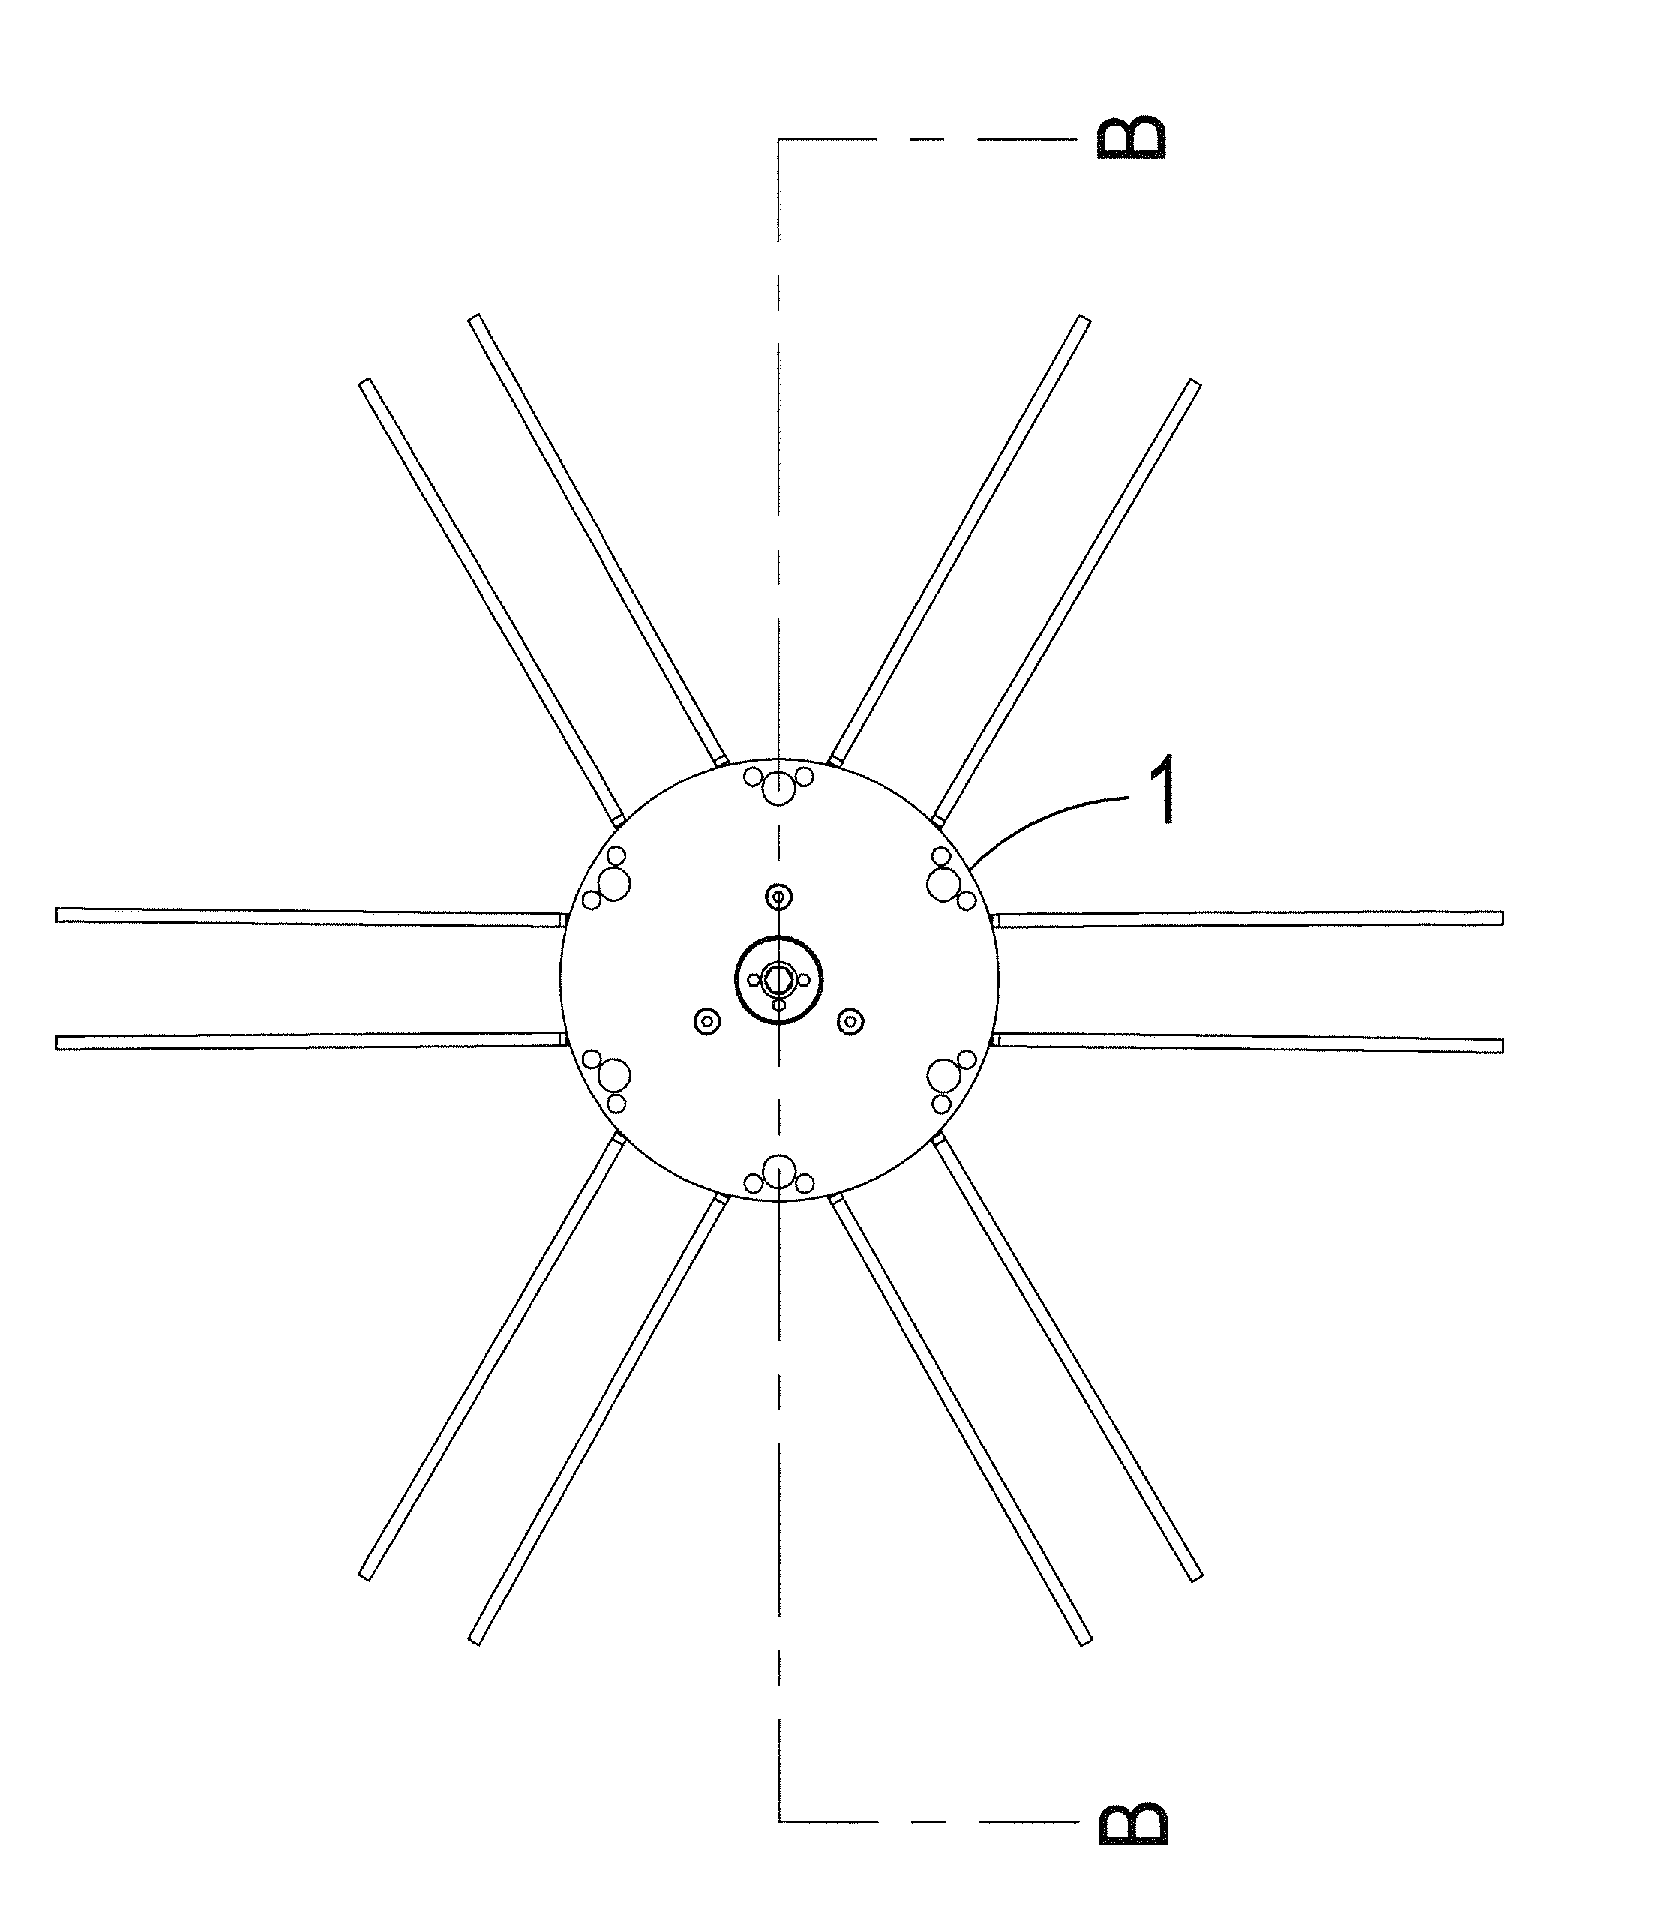 Structure of Sextant Rotary Disk